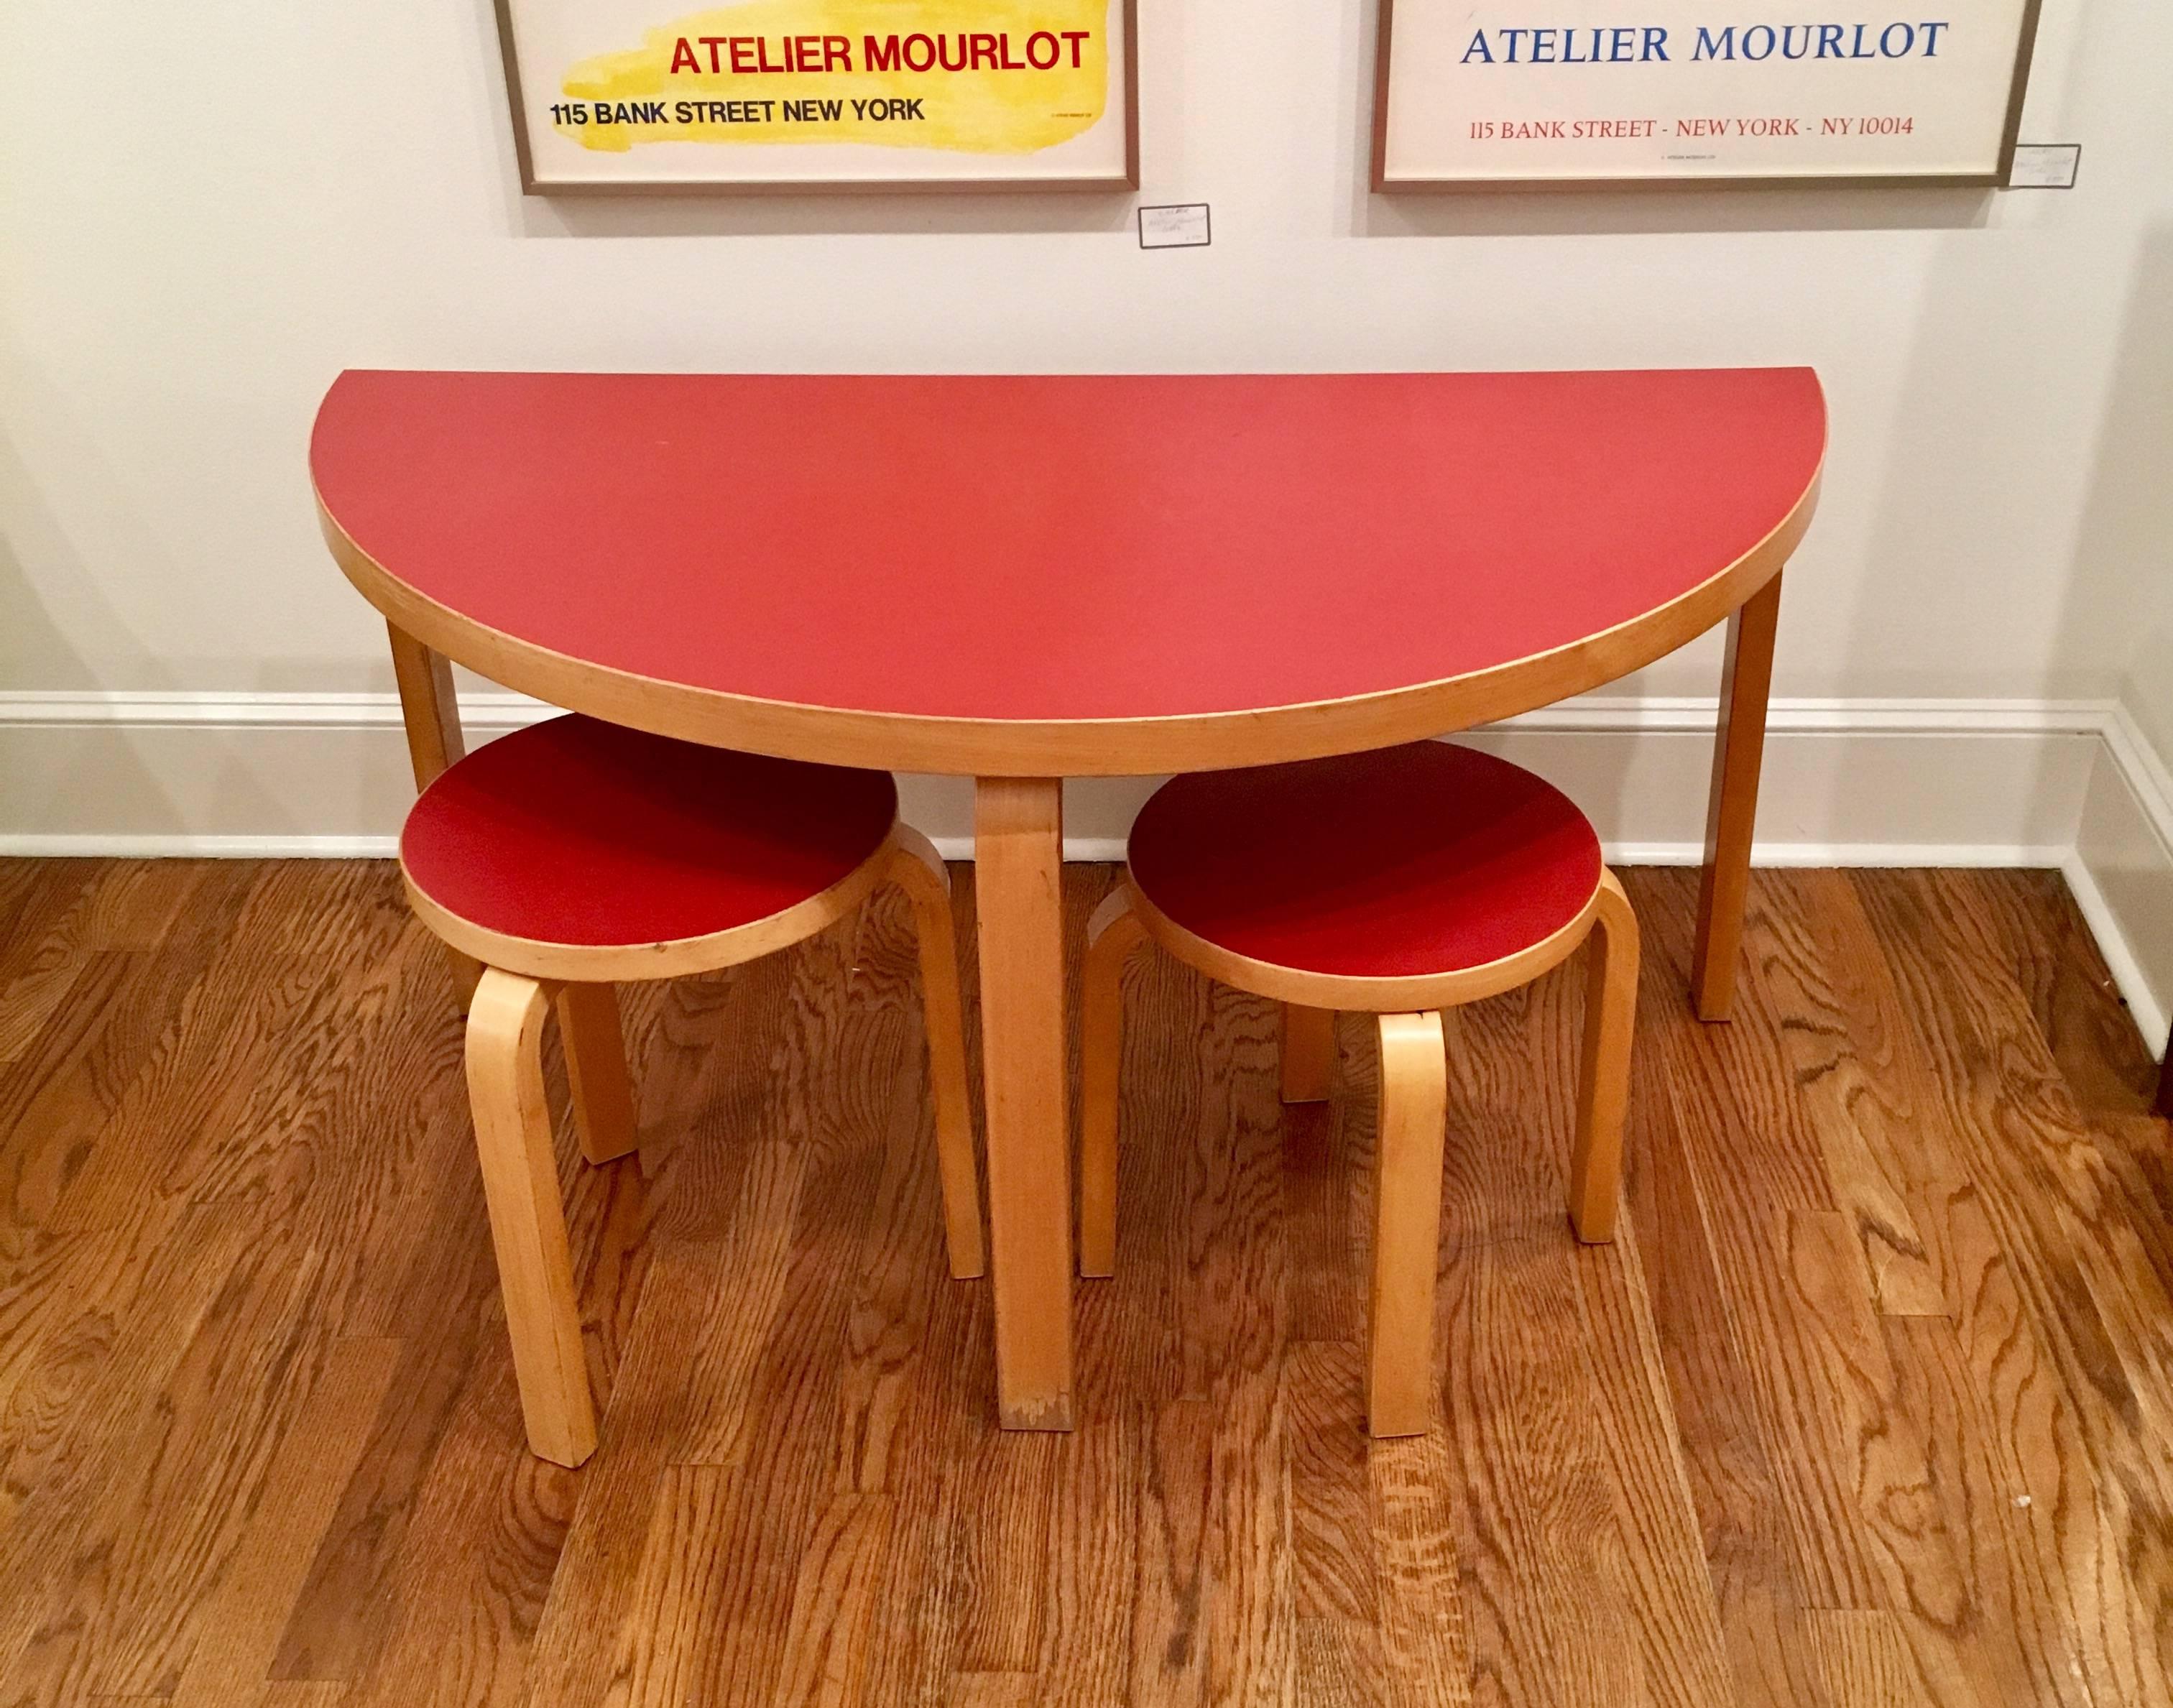 Vintage Alvar Aalto model 95 children's circular table and two stools. Manufactured by Artek of Finland. All pieces are made of birch wood and have red Formica tops. Tops have been refinished. Measurements of the two stools are 13.5